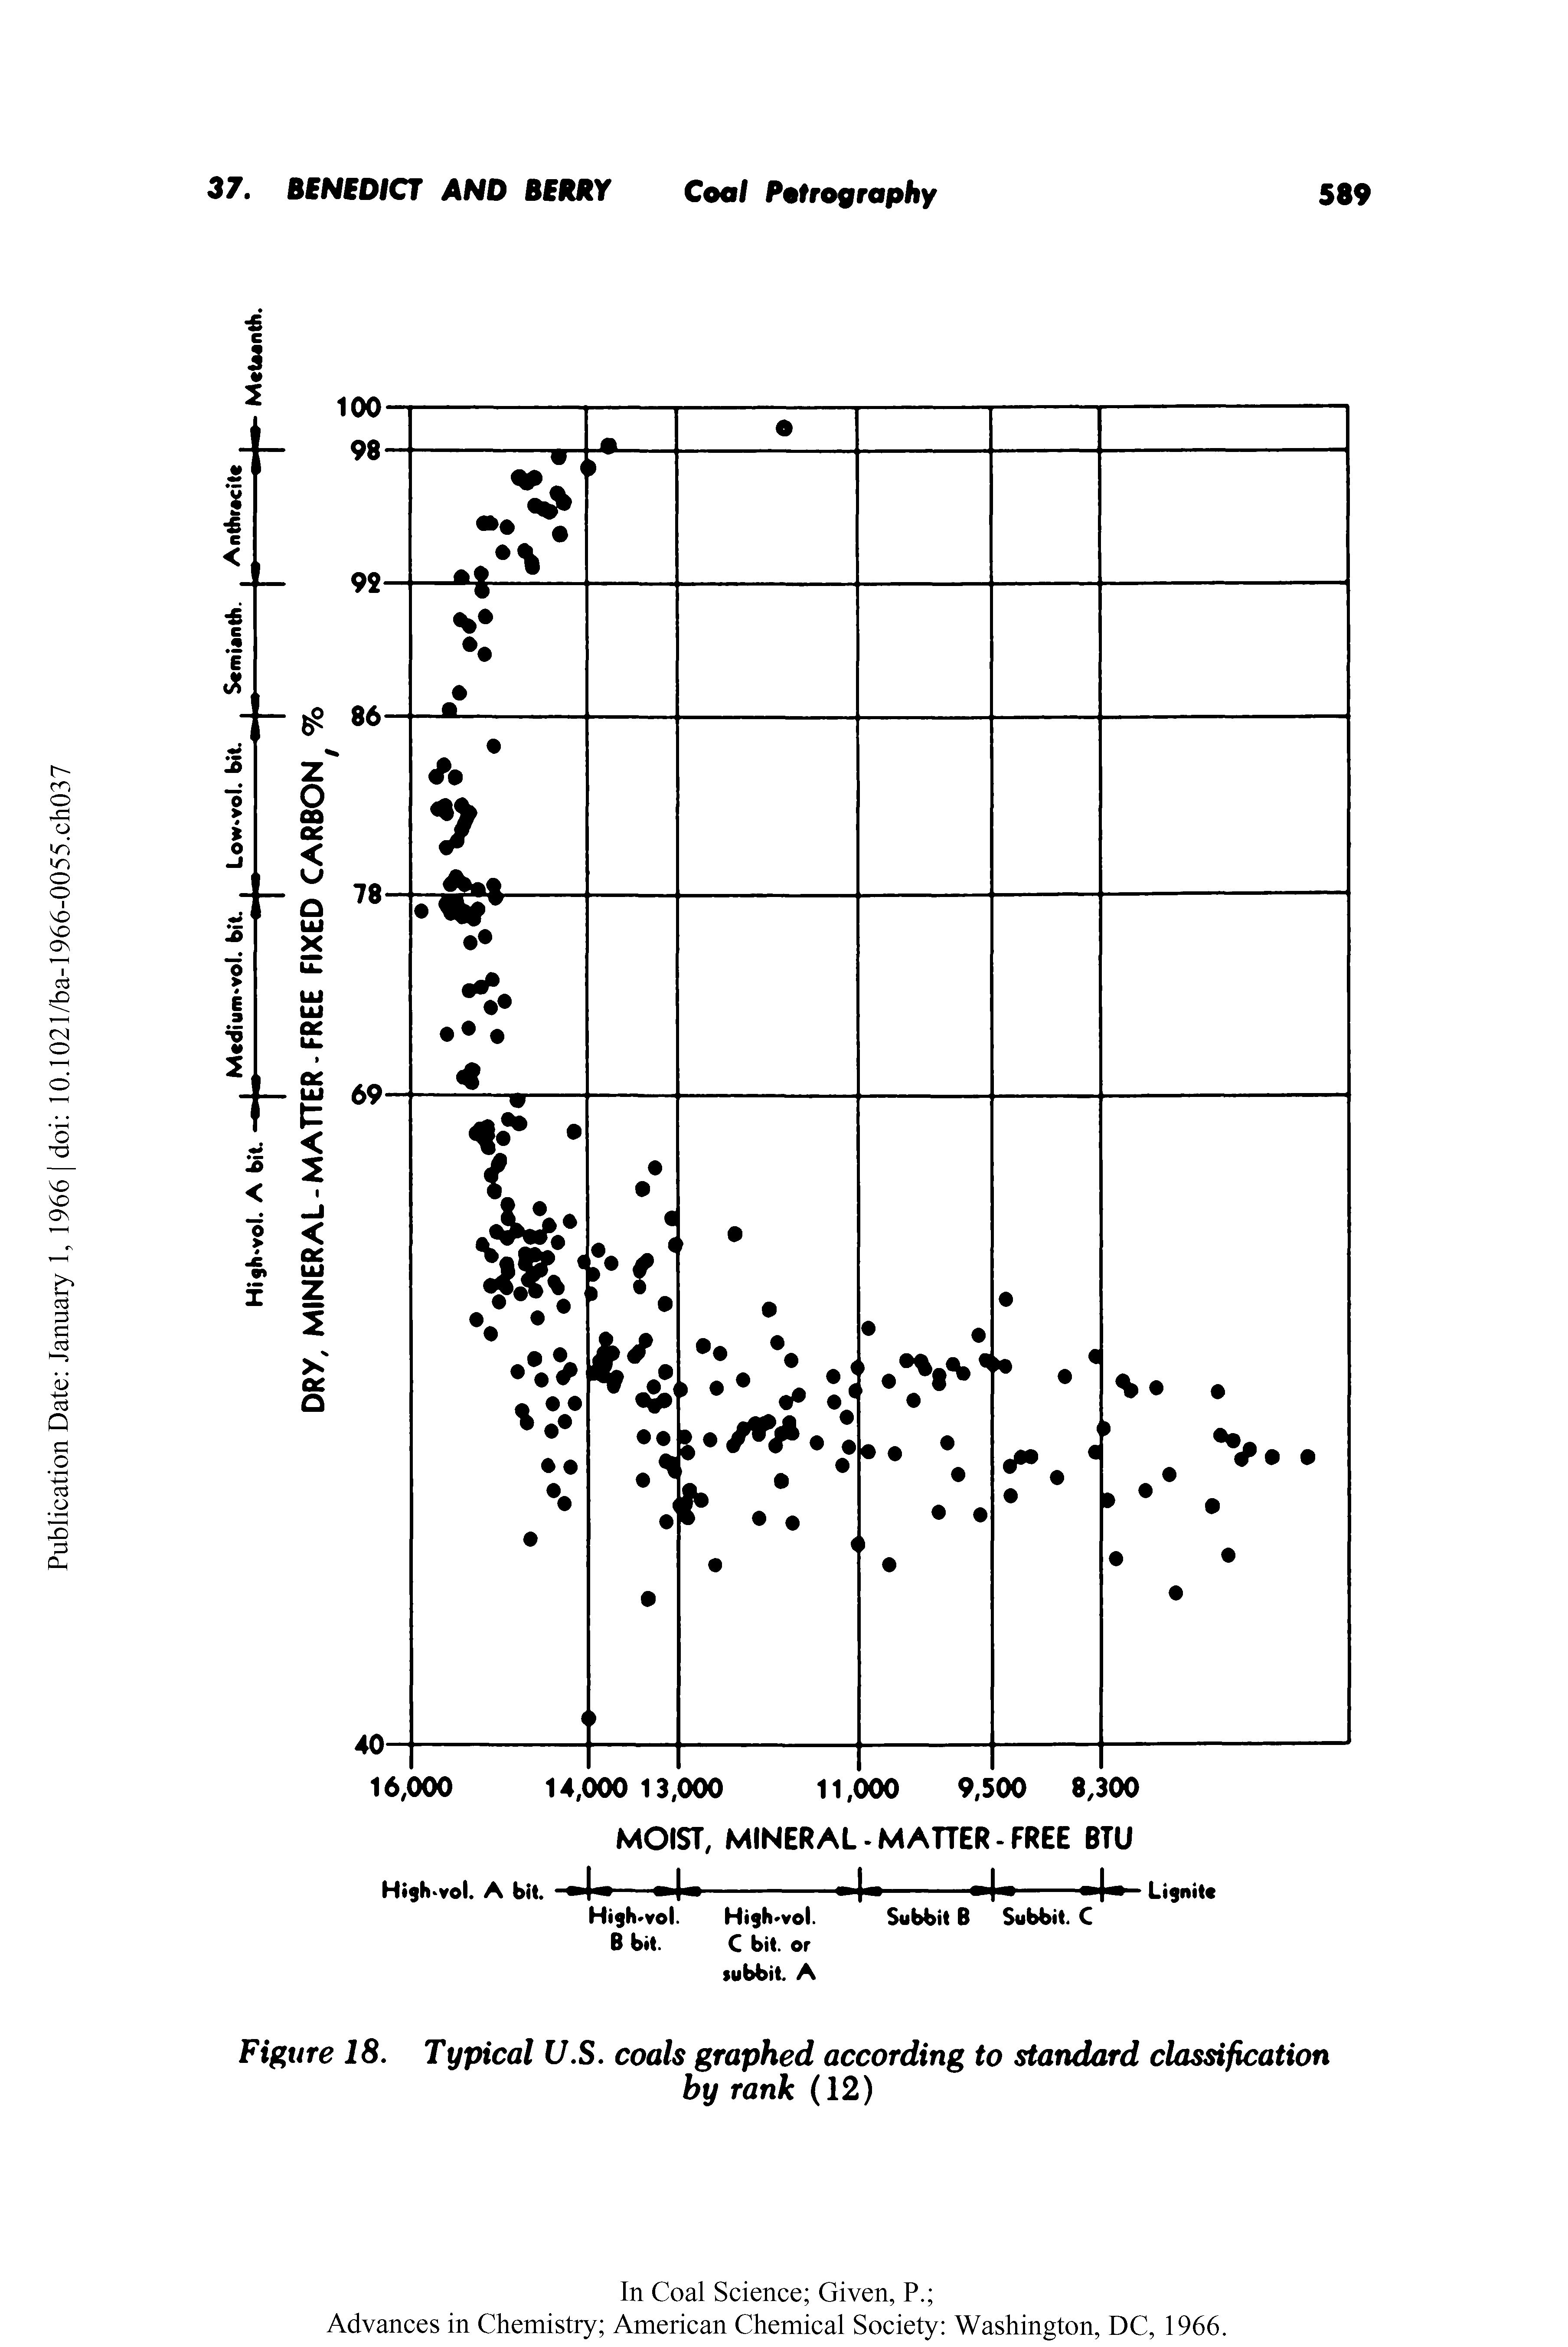 Figure 18. Typical U.S. coals graphed according to standard classification...